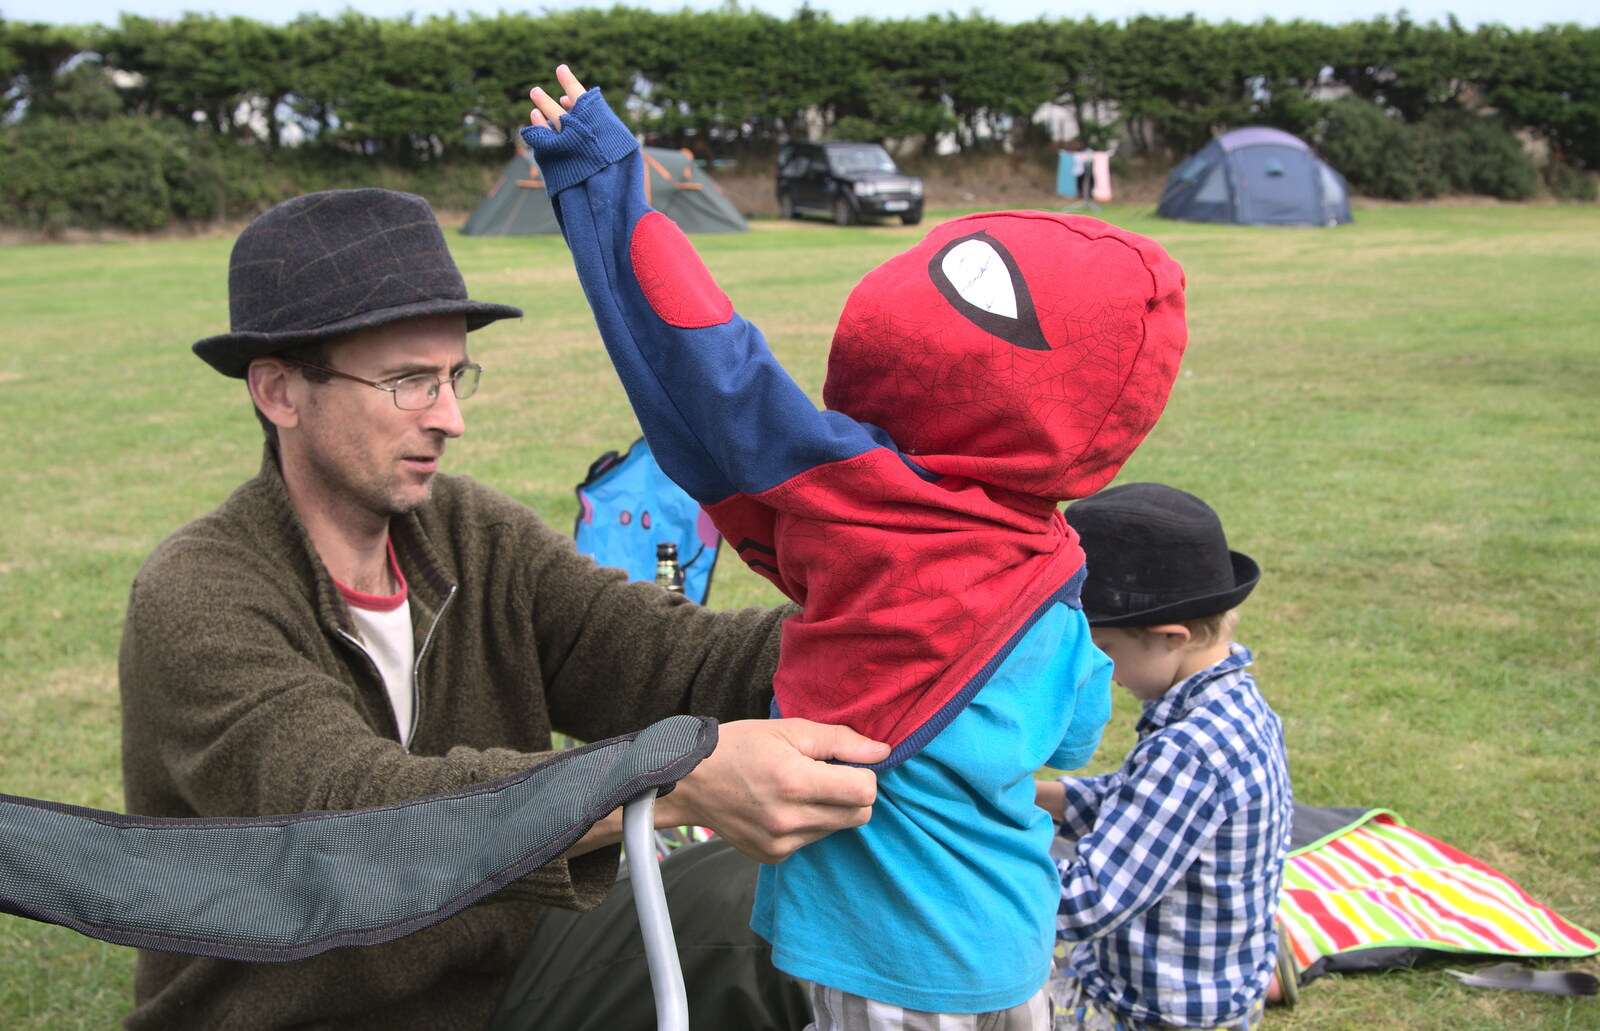 Philly helps Harry become Spiderman from Camping at Silver Strand, Wicklow, County Wicklow, Ireland - 7th August 2014